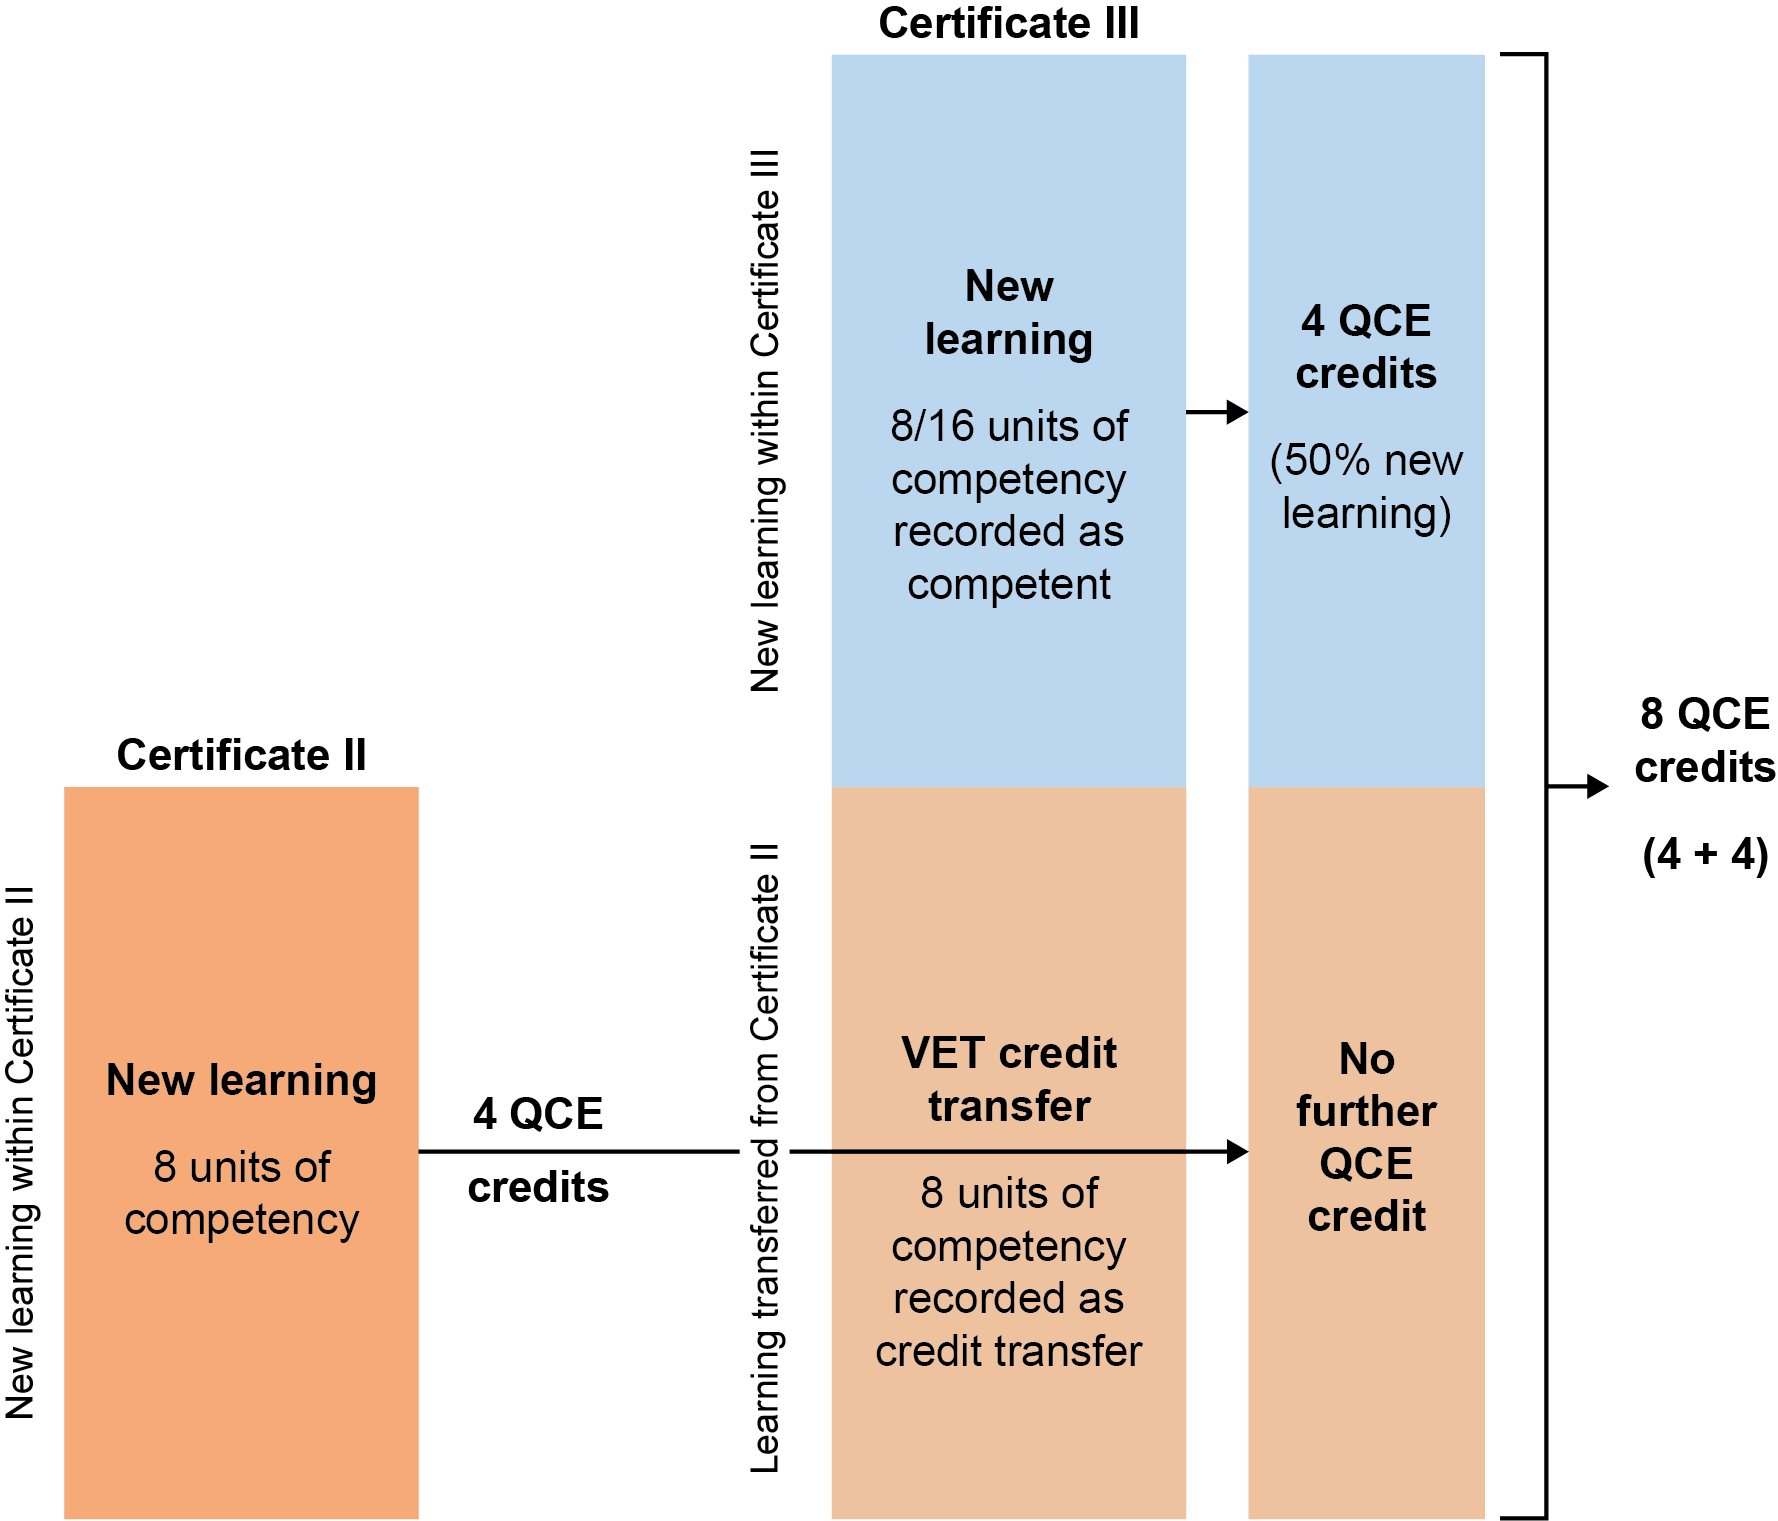 An example of QCE credit as detailed in the section text